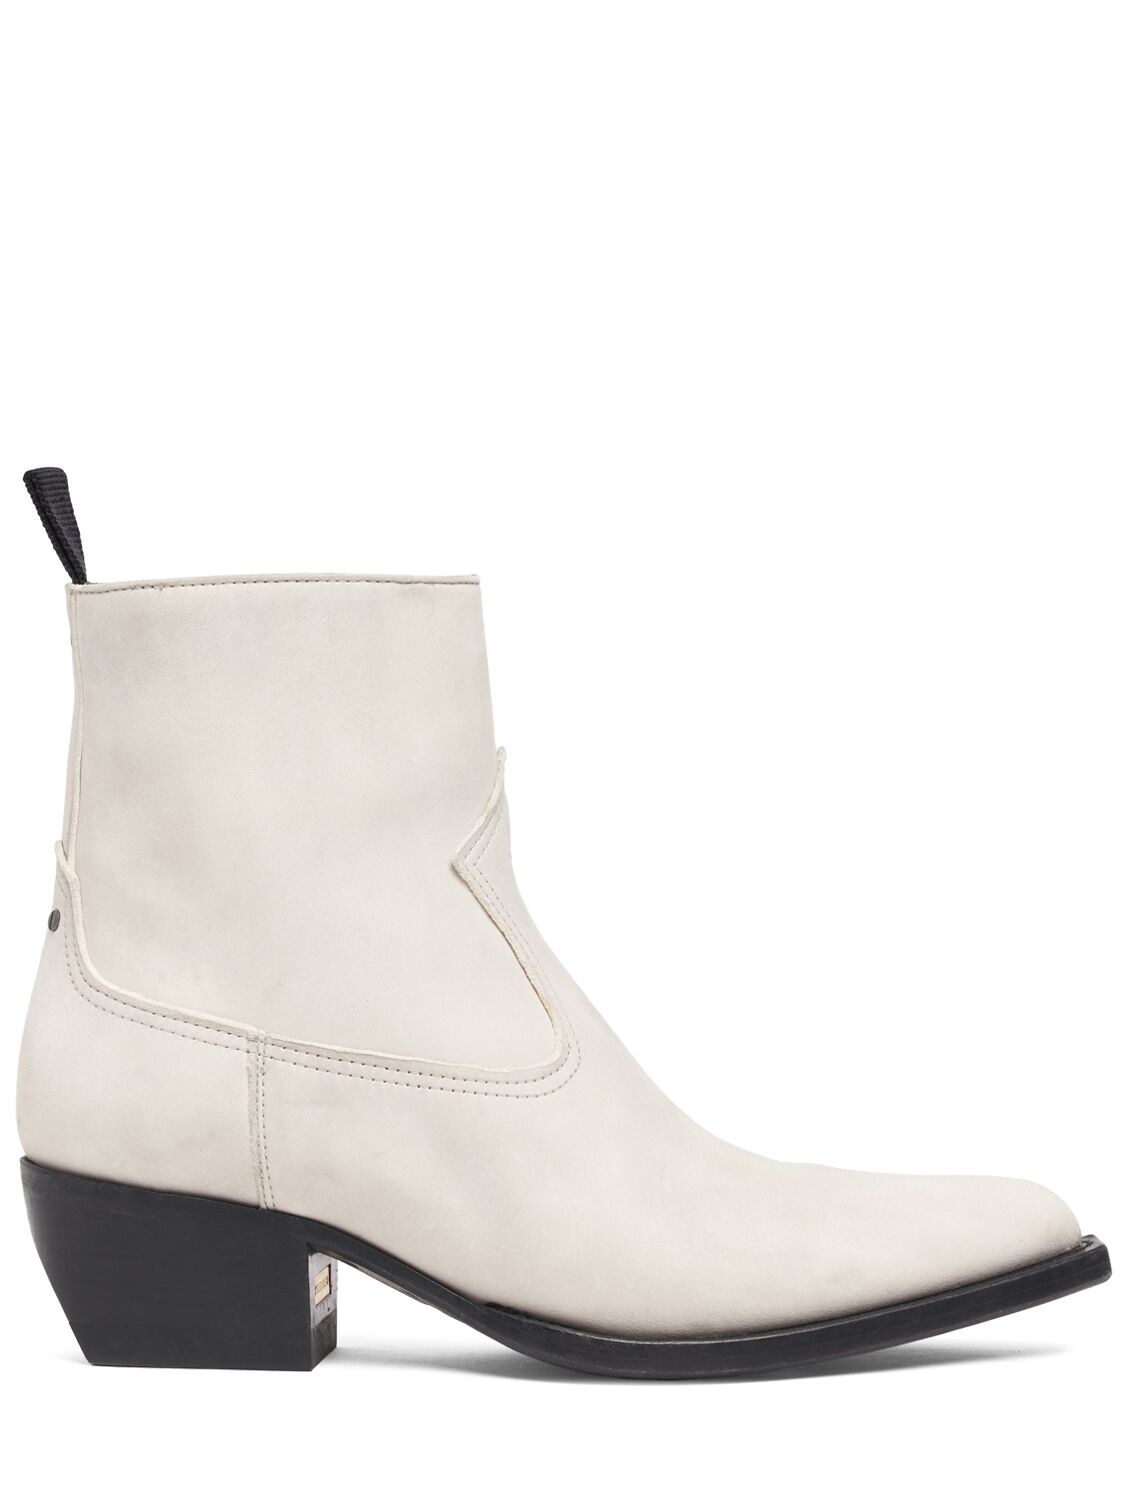 Golden Goose 45mm Debbie Leather Ankle Boots In Butter